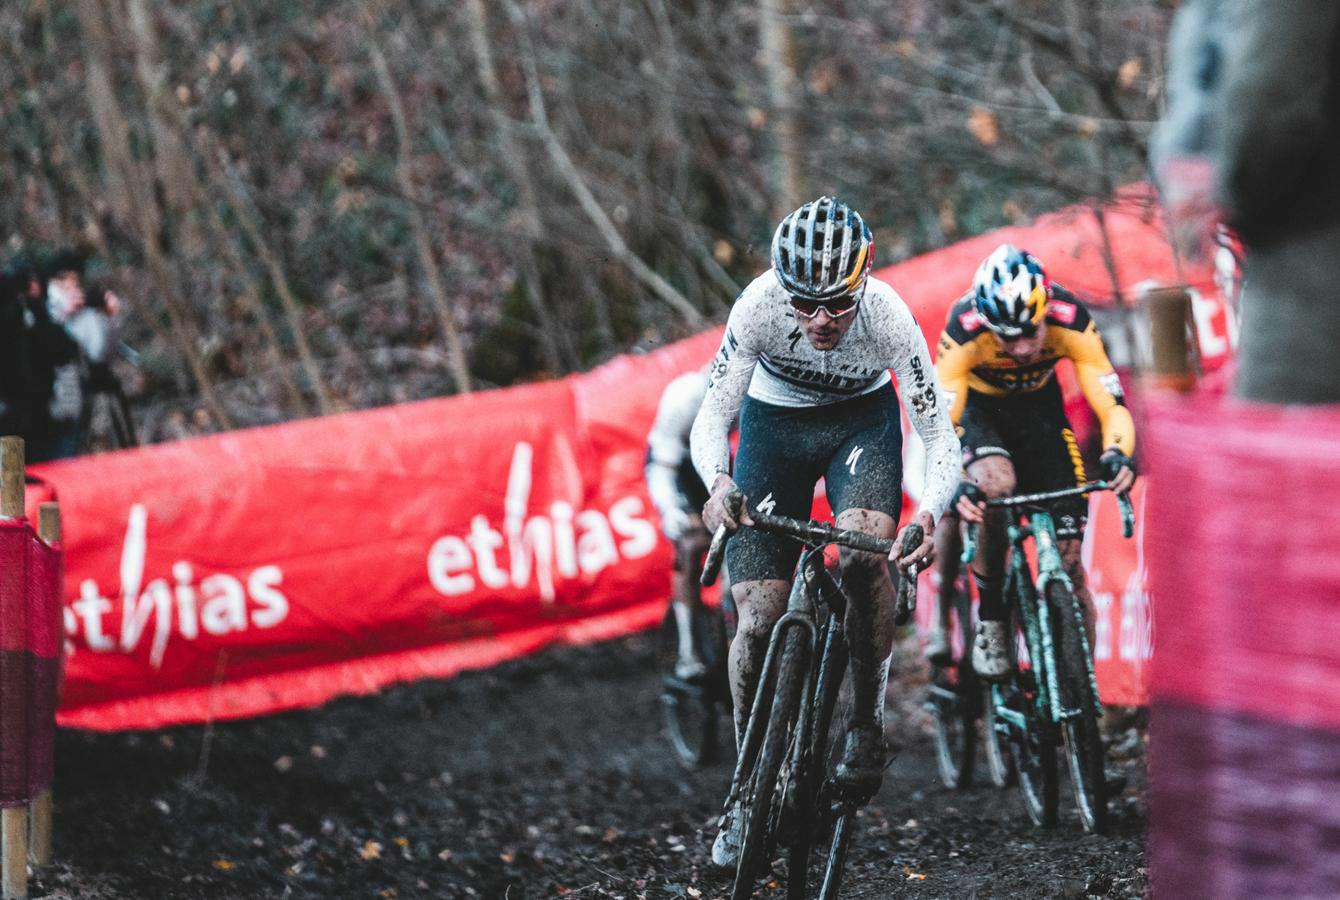 No shortage of UCI Cyclo-cross World Cup races this weekend with rounds in Rucphen and Namur!